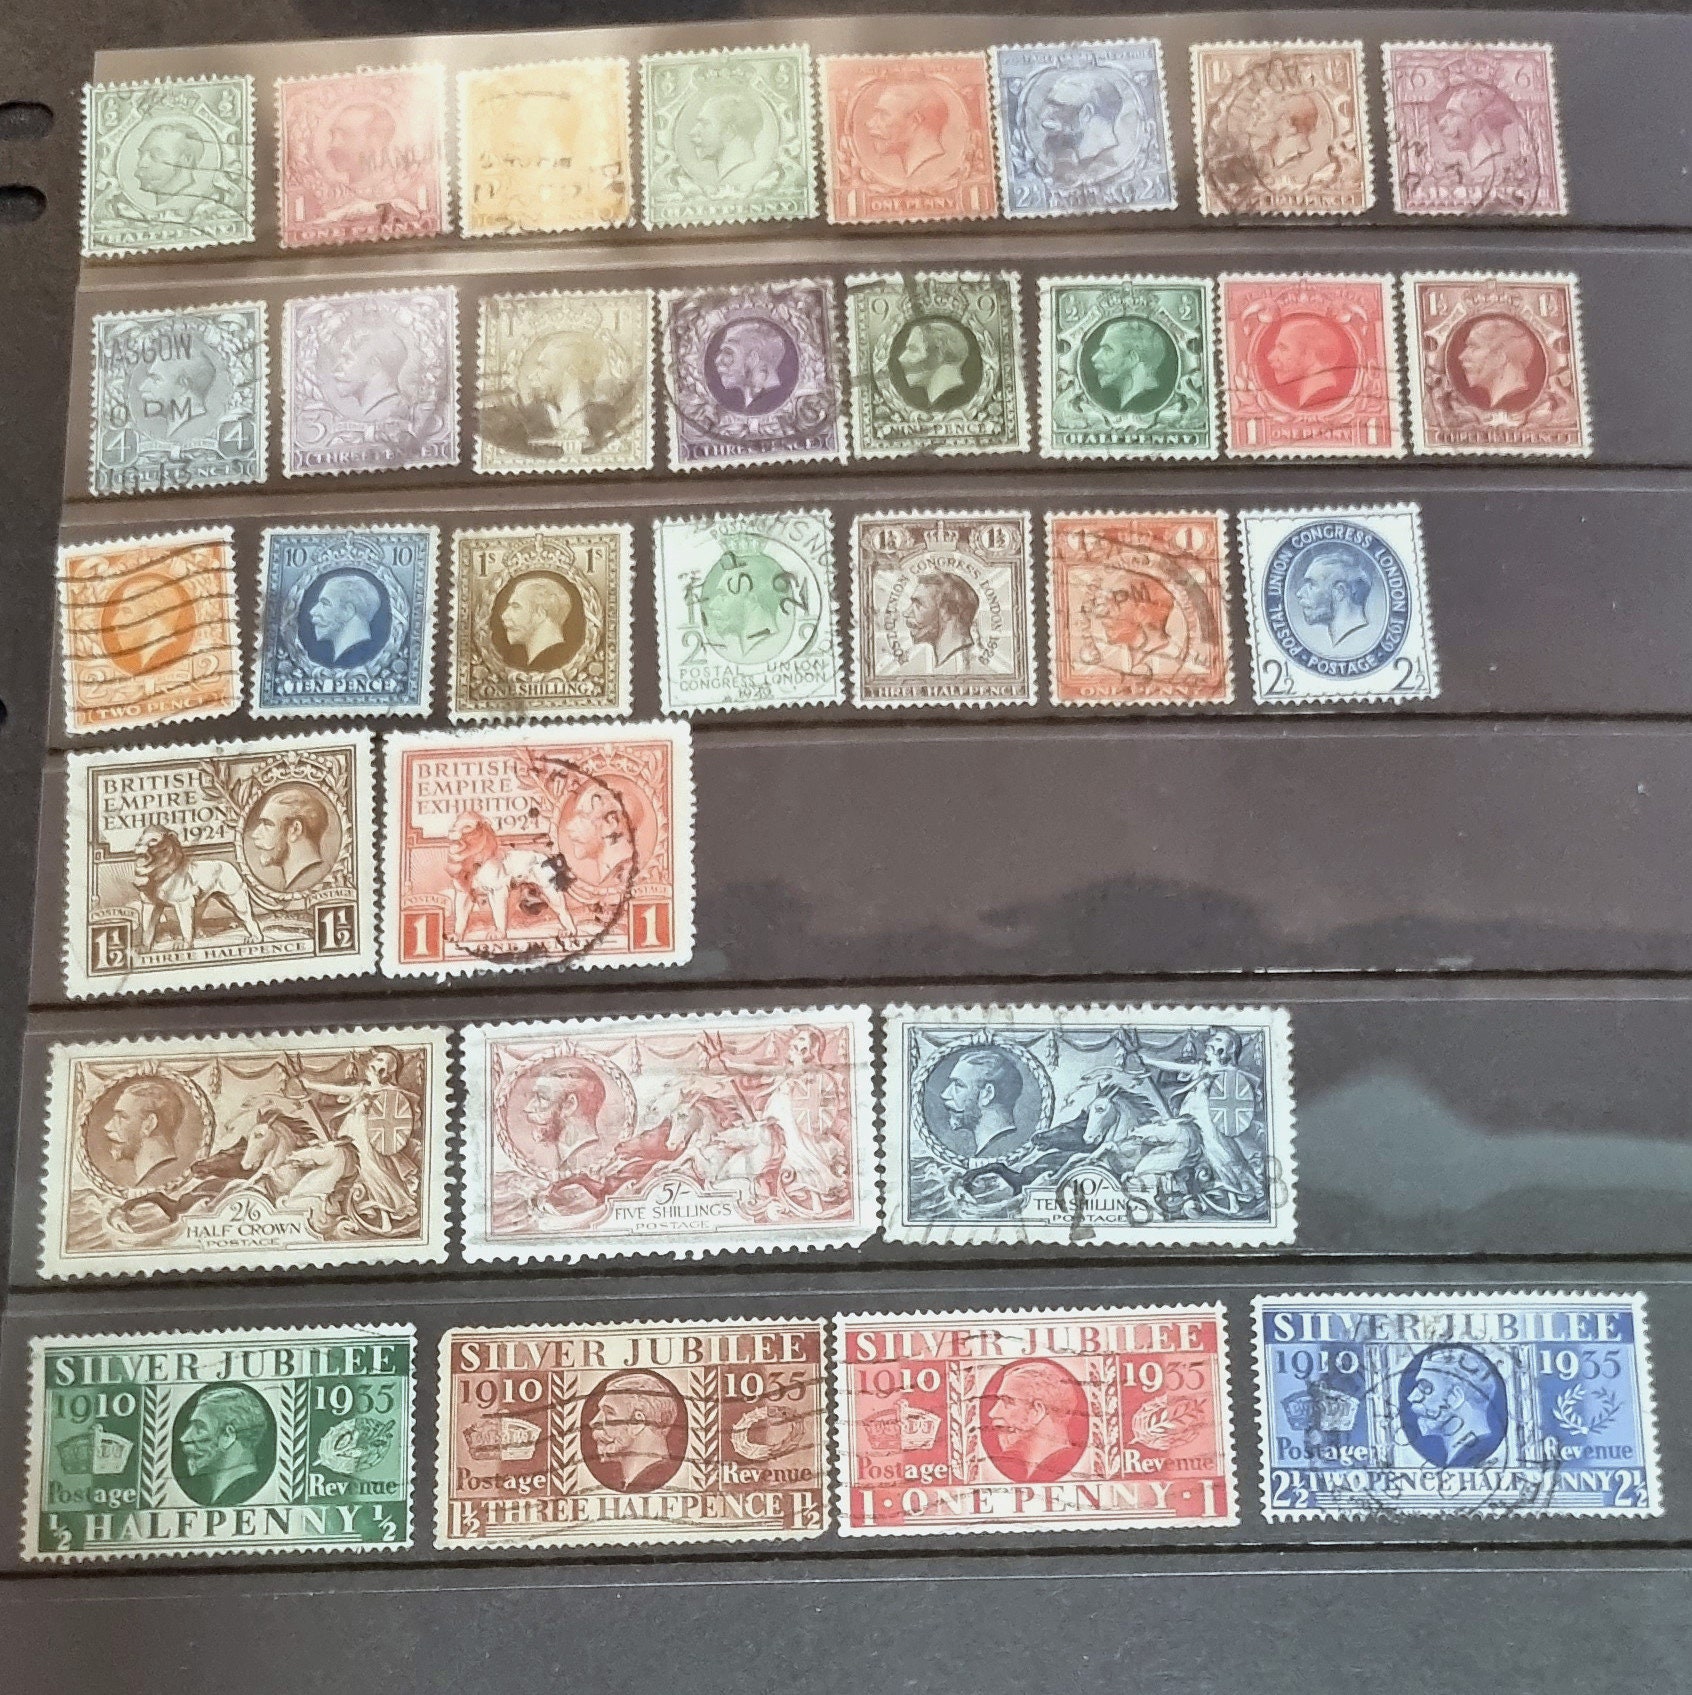 25 Used Rainbow Old British Postage Stamps, All Different, All off Paper  for Scrapbooking, Stamp Collecting and Crafting 